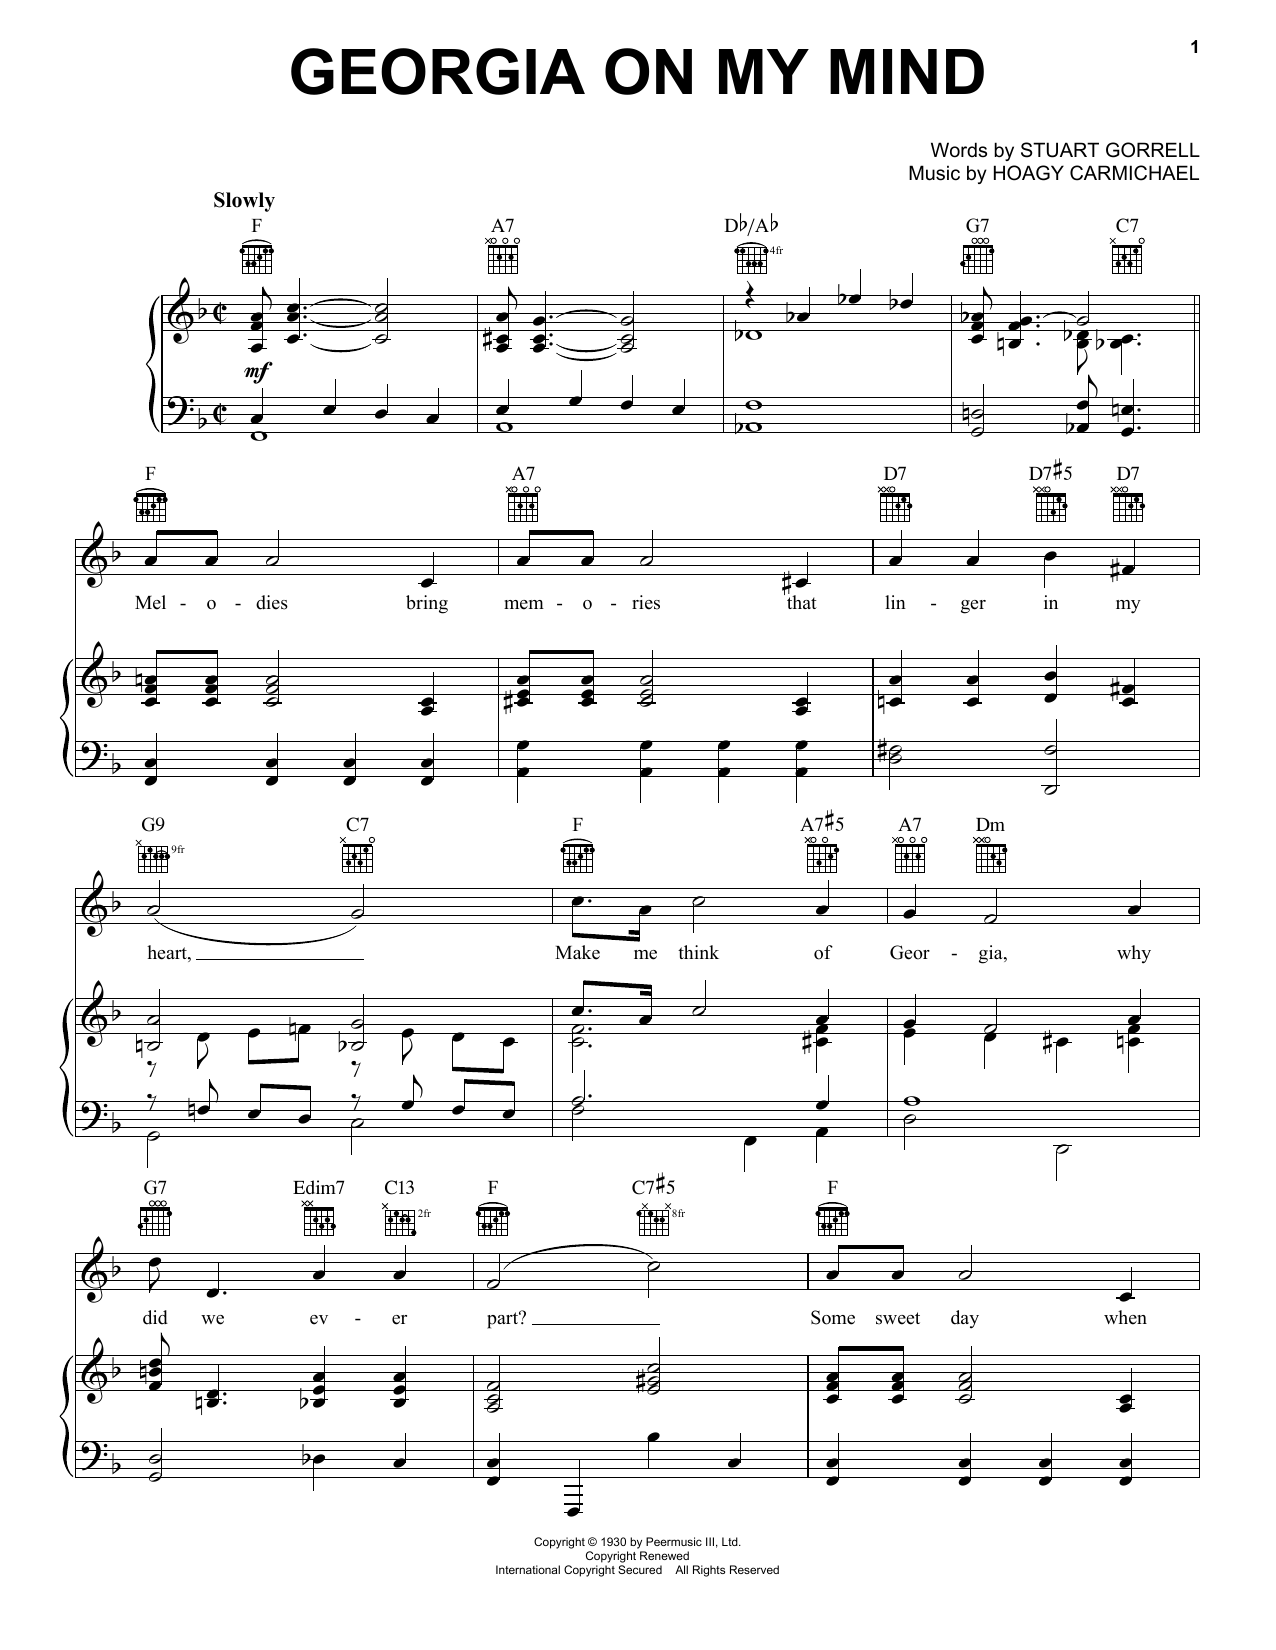 Ray Charles Georgia On My Mind sheet music notes and chords. Download Printable PDF.